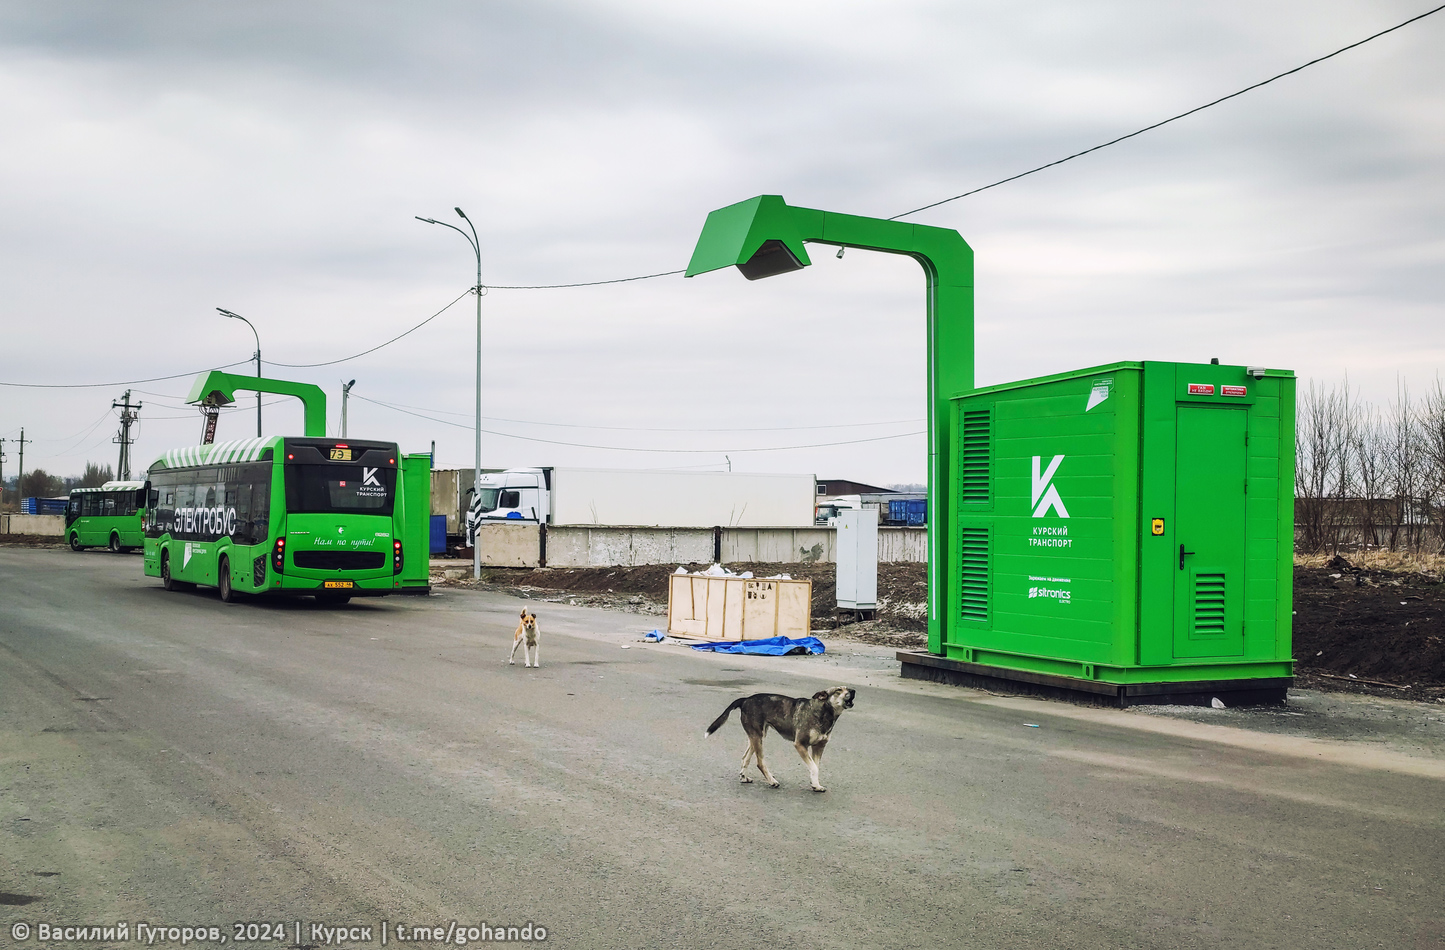 Kursk — Terminal stations; Transport and animals